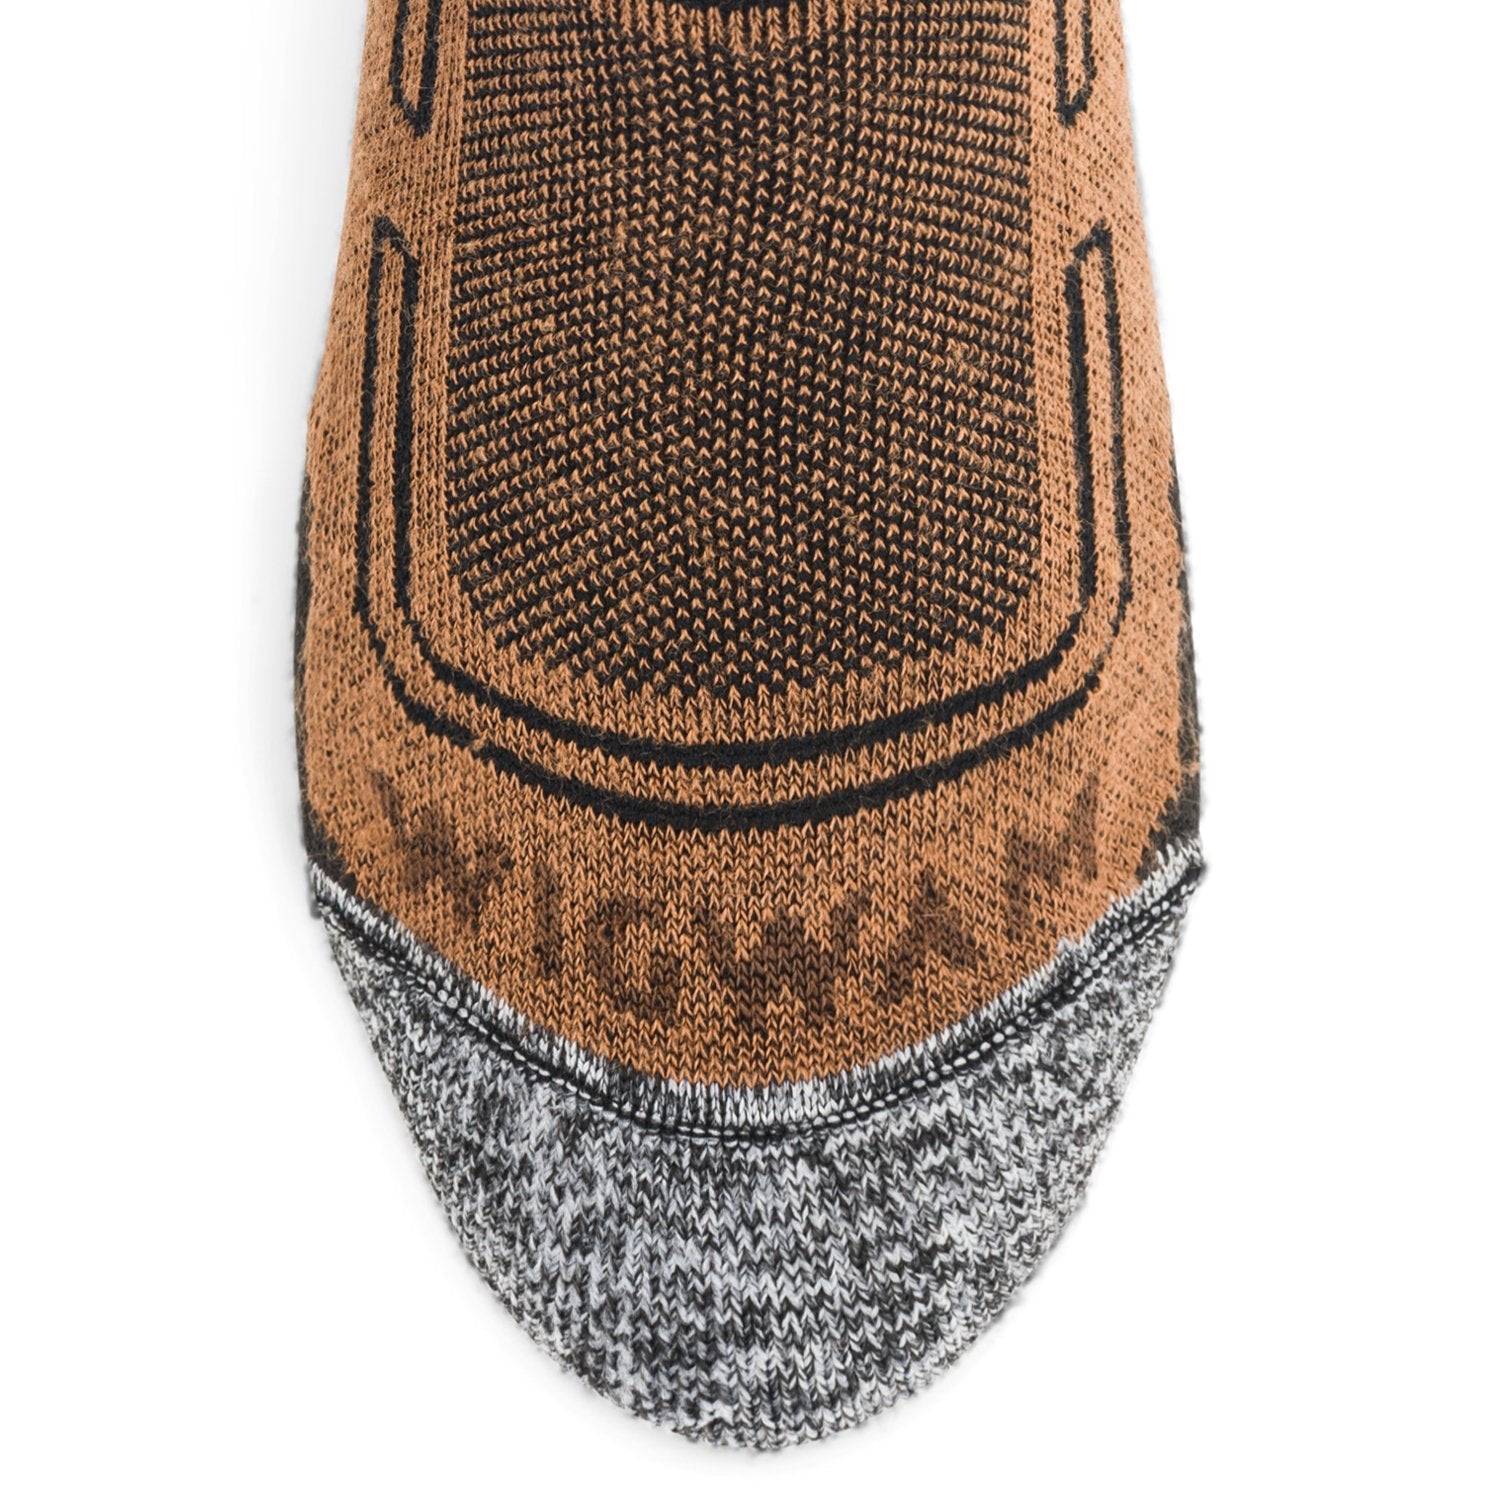 No Fly Zone Outdoor Over-The-Calf Sock - Coyote Brown toe perspective - made in The USA Wigwam Socks